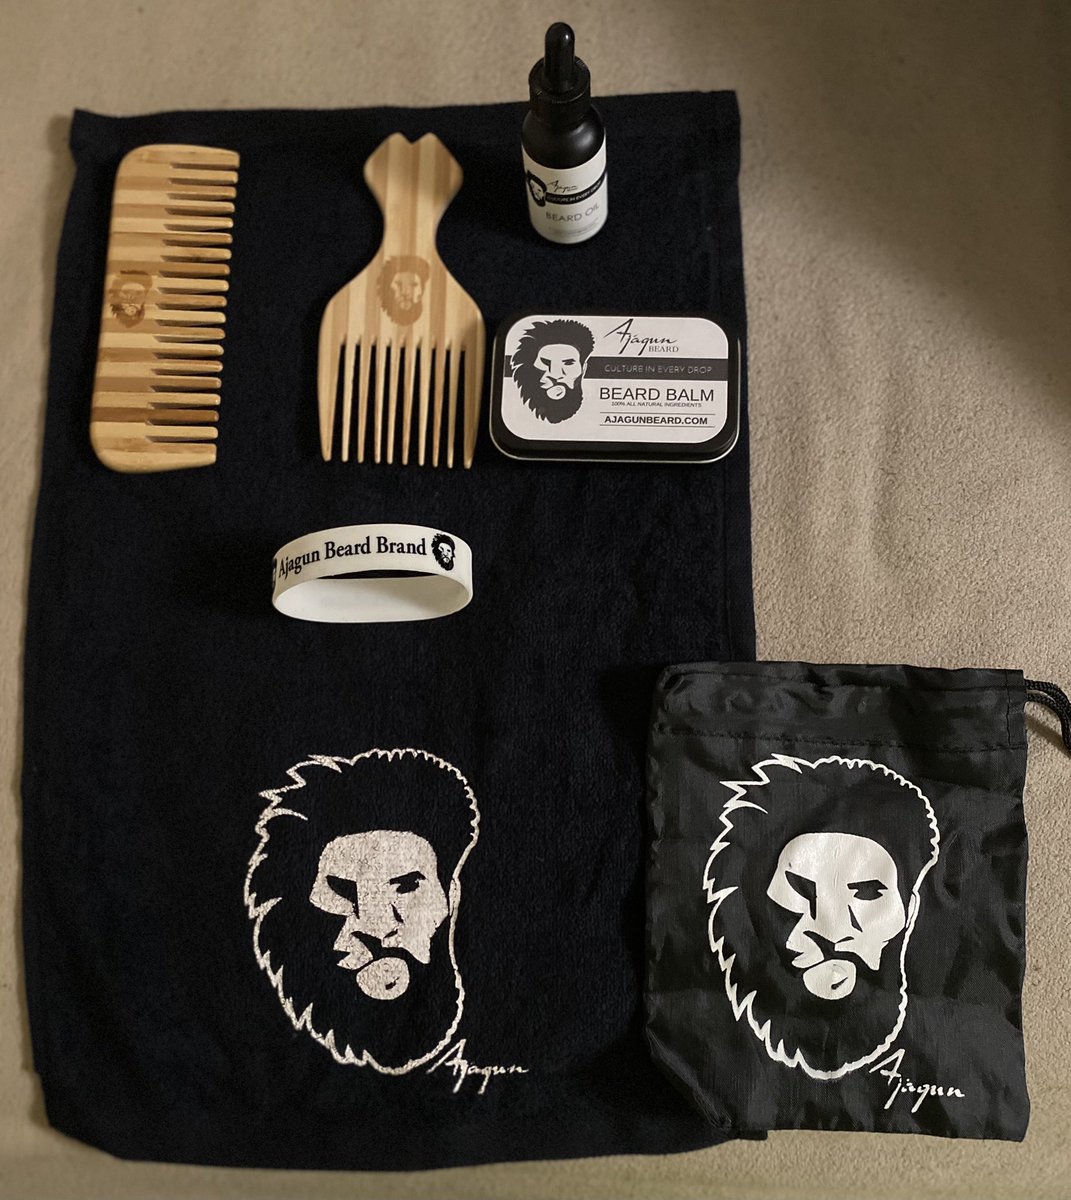 Check out this #BlackOwned #Beard business.
Ajagun Beard products are NEXT LEVEL!
Link to their IG page below.
#BlackOwnedBusiness #BlackHairCare #BeardGang 

instagram.com/ajagunbeard?ut…